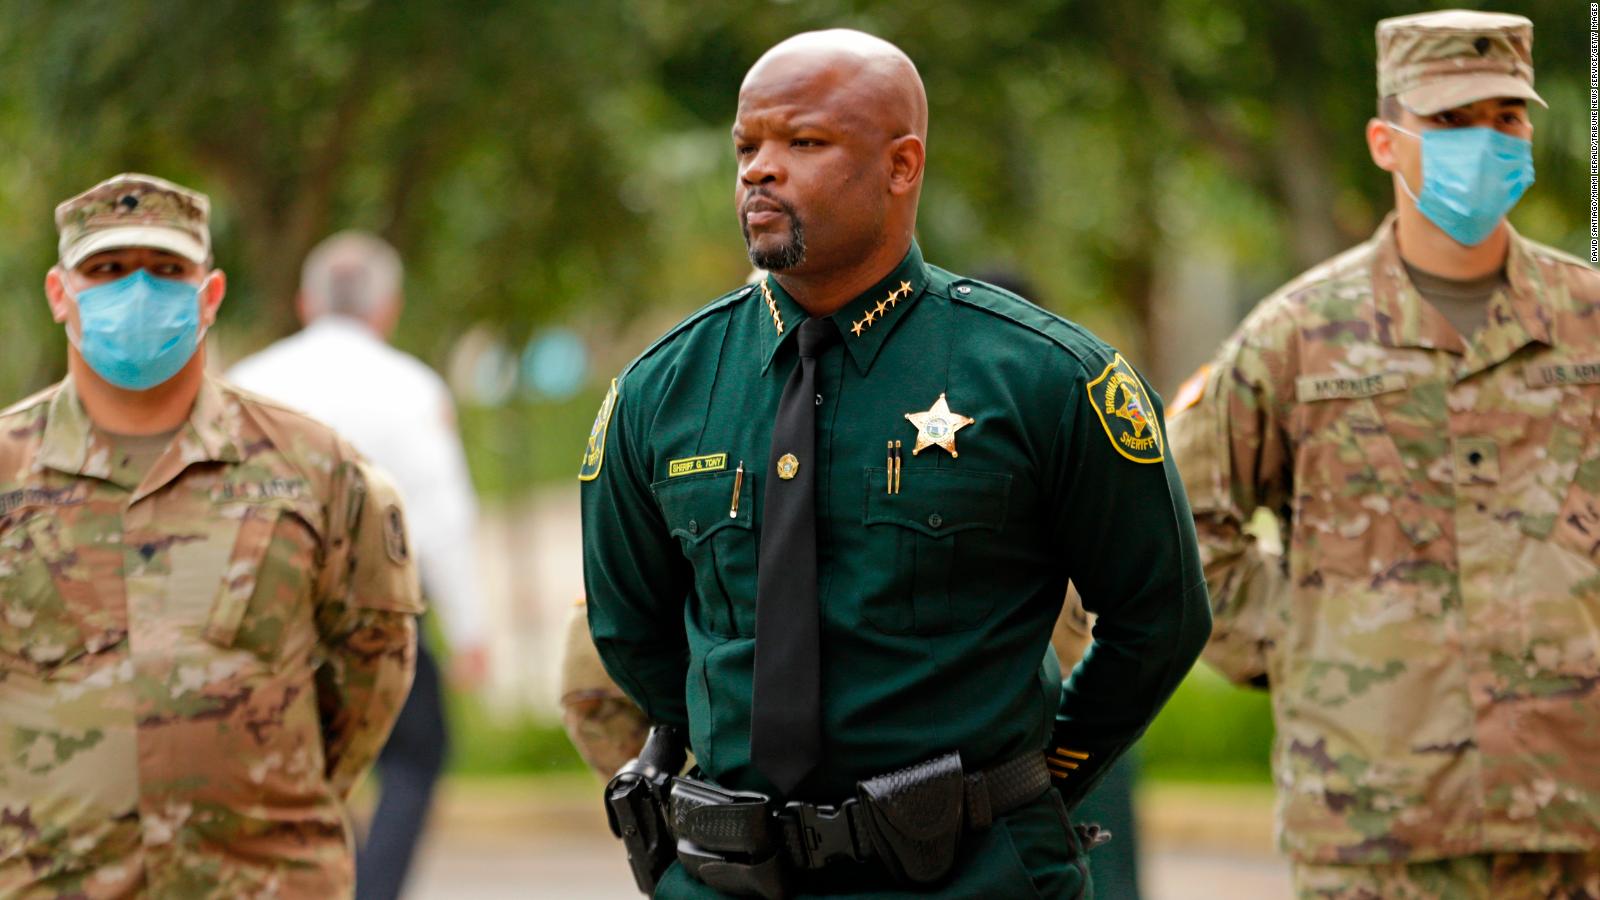 Florida County Sheriff Defends Decision Not To Disclose That He Killed 7791